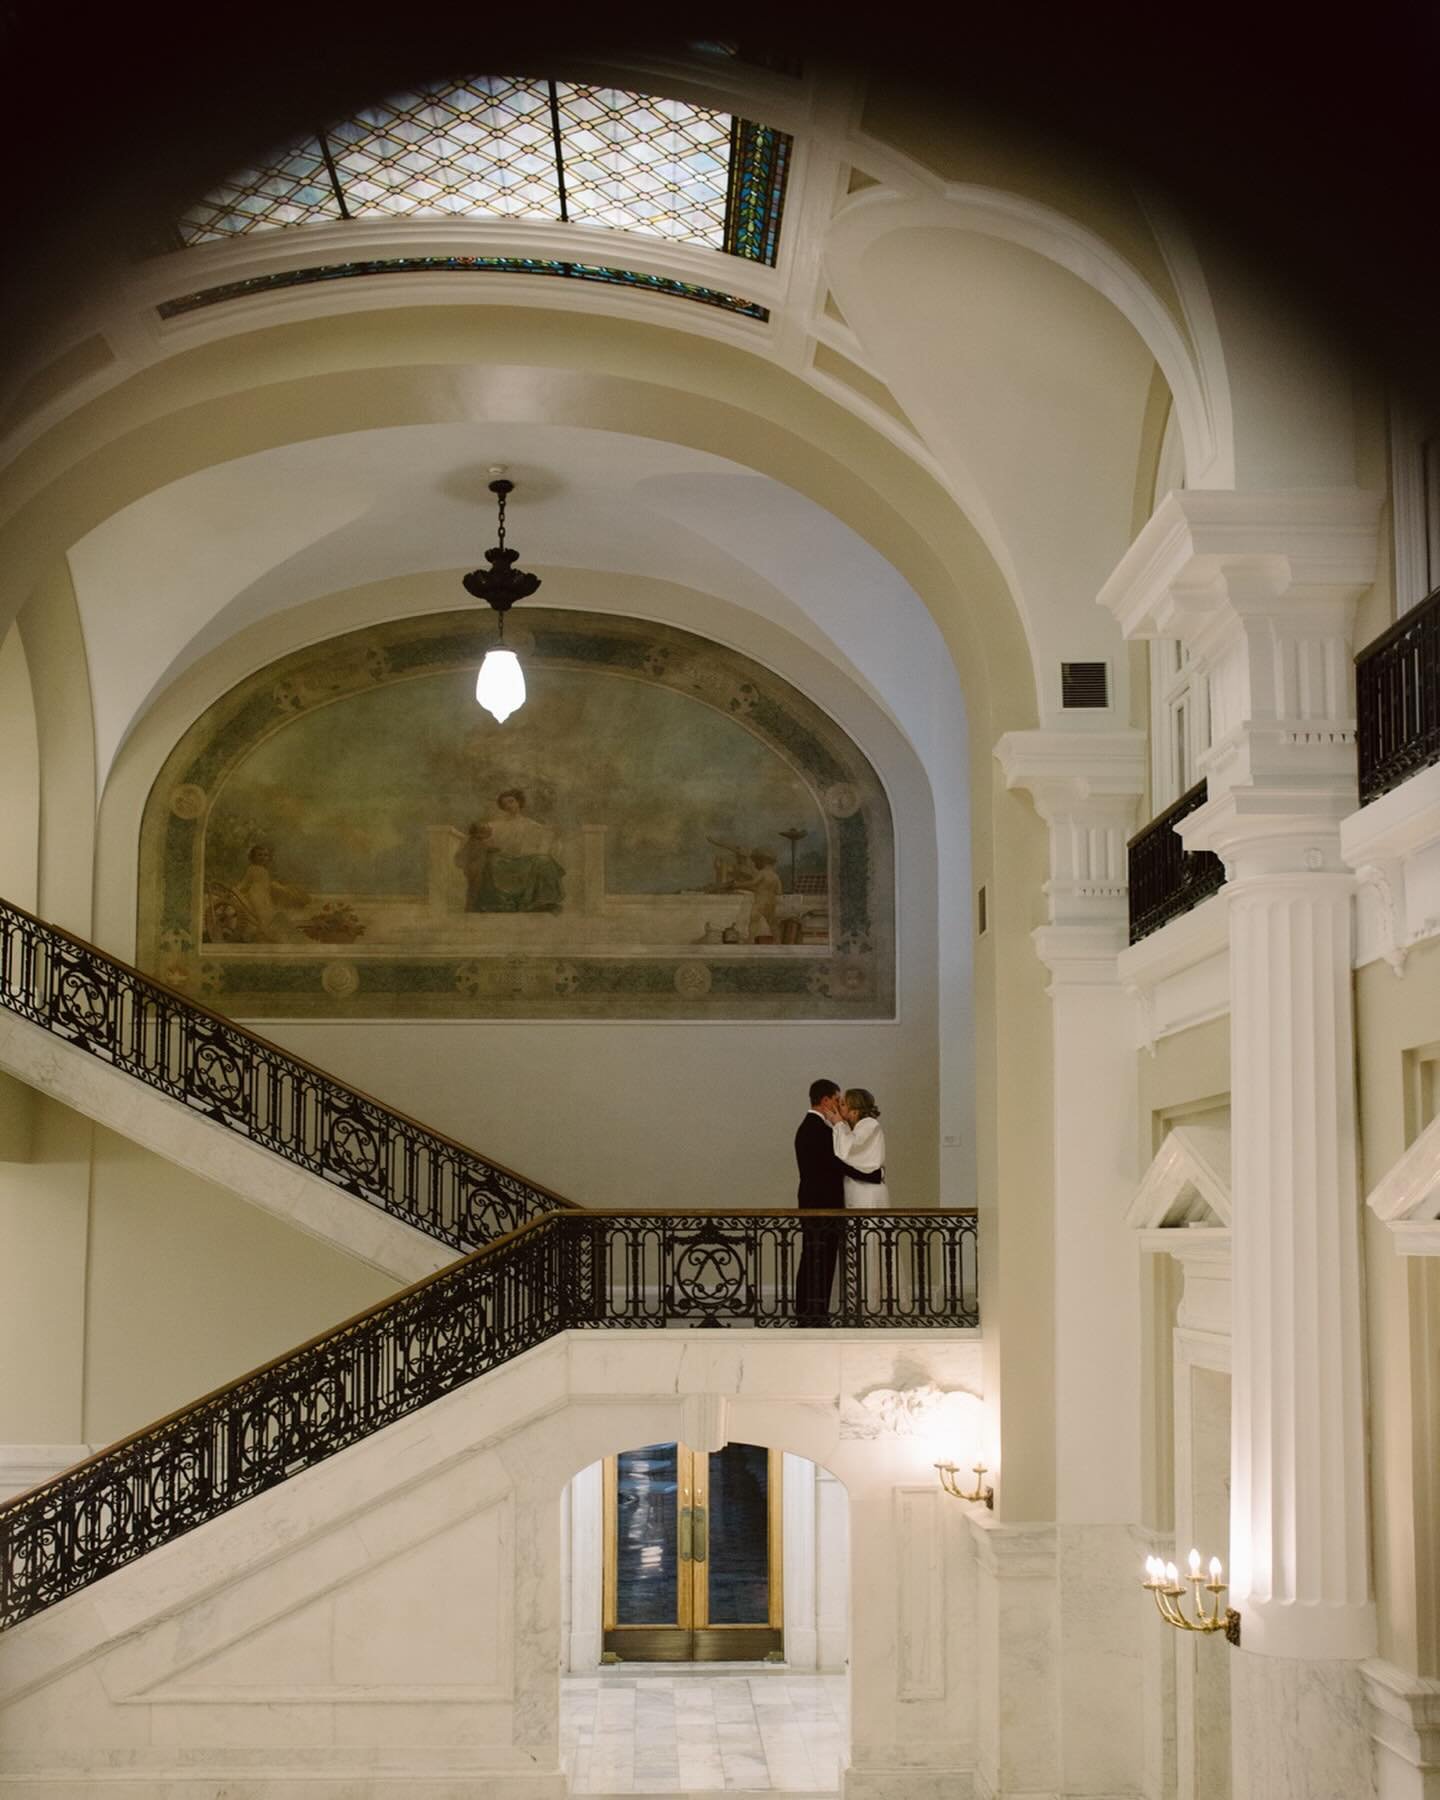 Part 2 of Matthew &amp; Katie&rsquo;s elopement &hellip; while rain can be romantic, it ended up storming &amp; being super windy at the first location (in a not cute way for photos). I suggested the library downtown, so we went spur of the moment - 